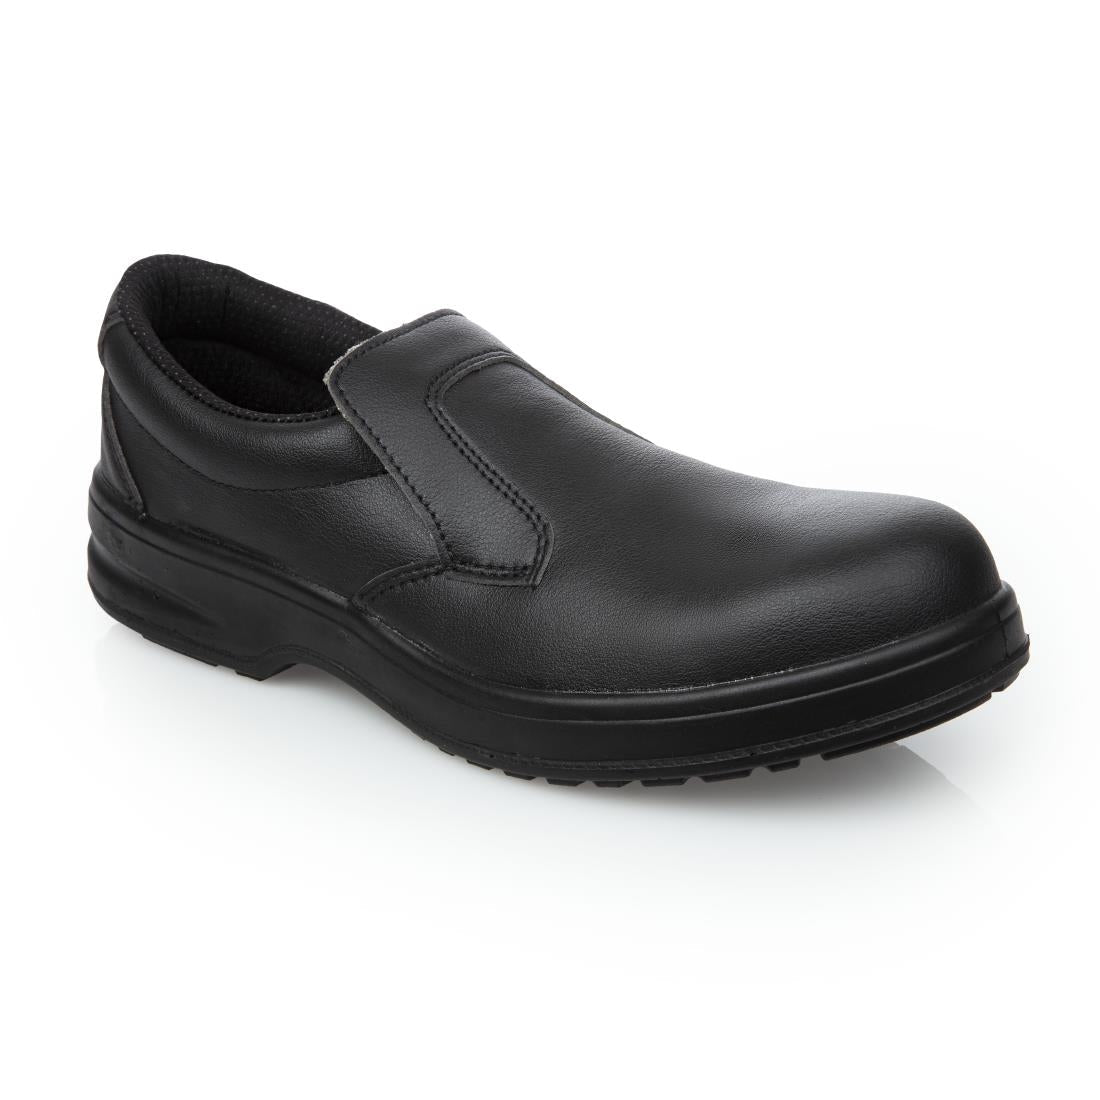 A845-40 Slipbuster Lite Slip On Safety Shoes Black 40 JD Catering Equipment Solutions Ltd